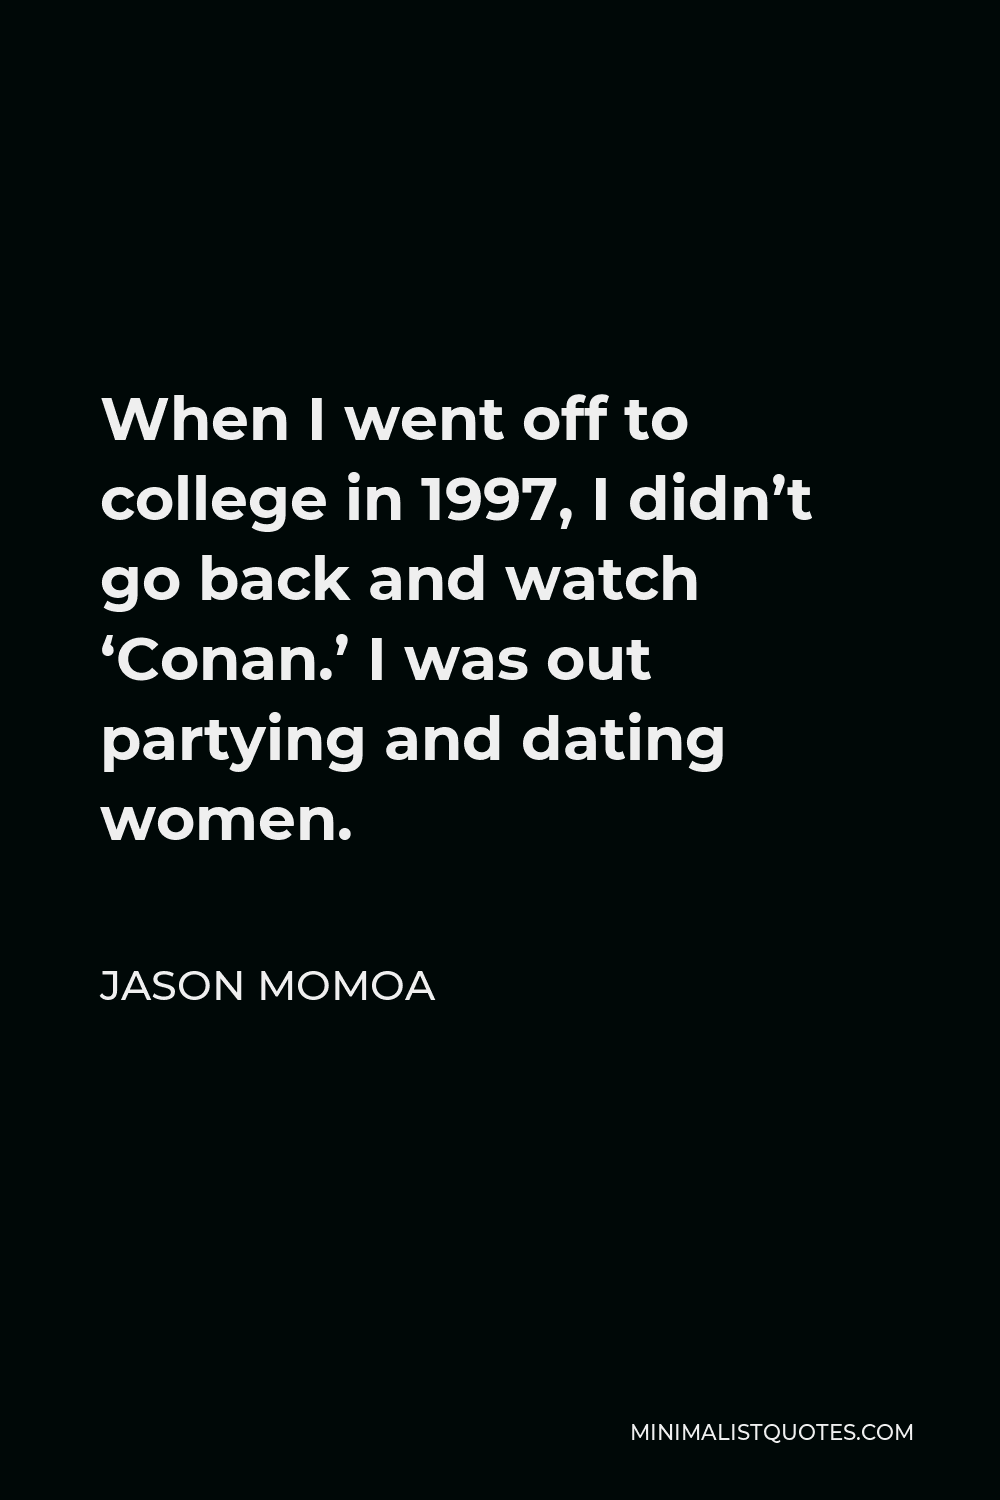 Jason Momoa Quote - When I went off to college in 1997, I didn’t go back and watch ‘Conan.’ I was out partying and dating women.